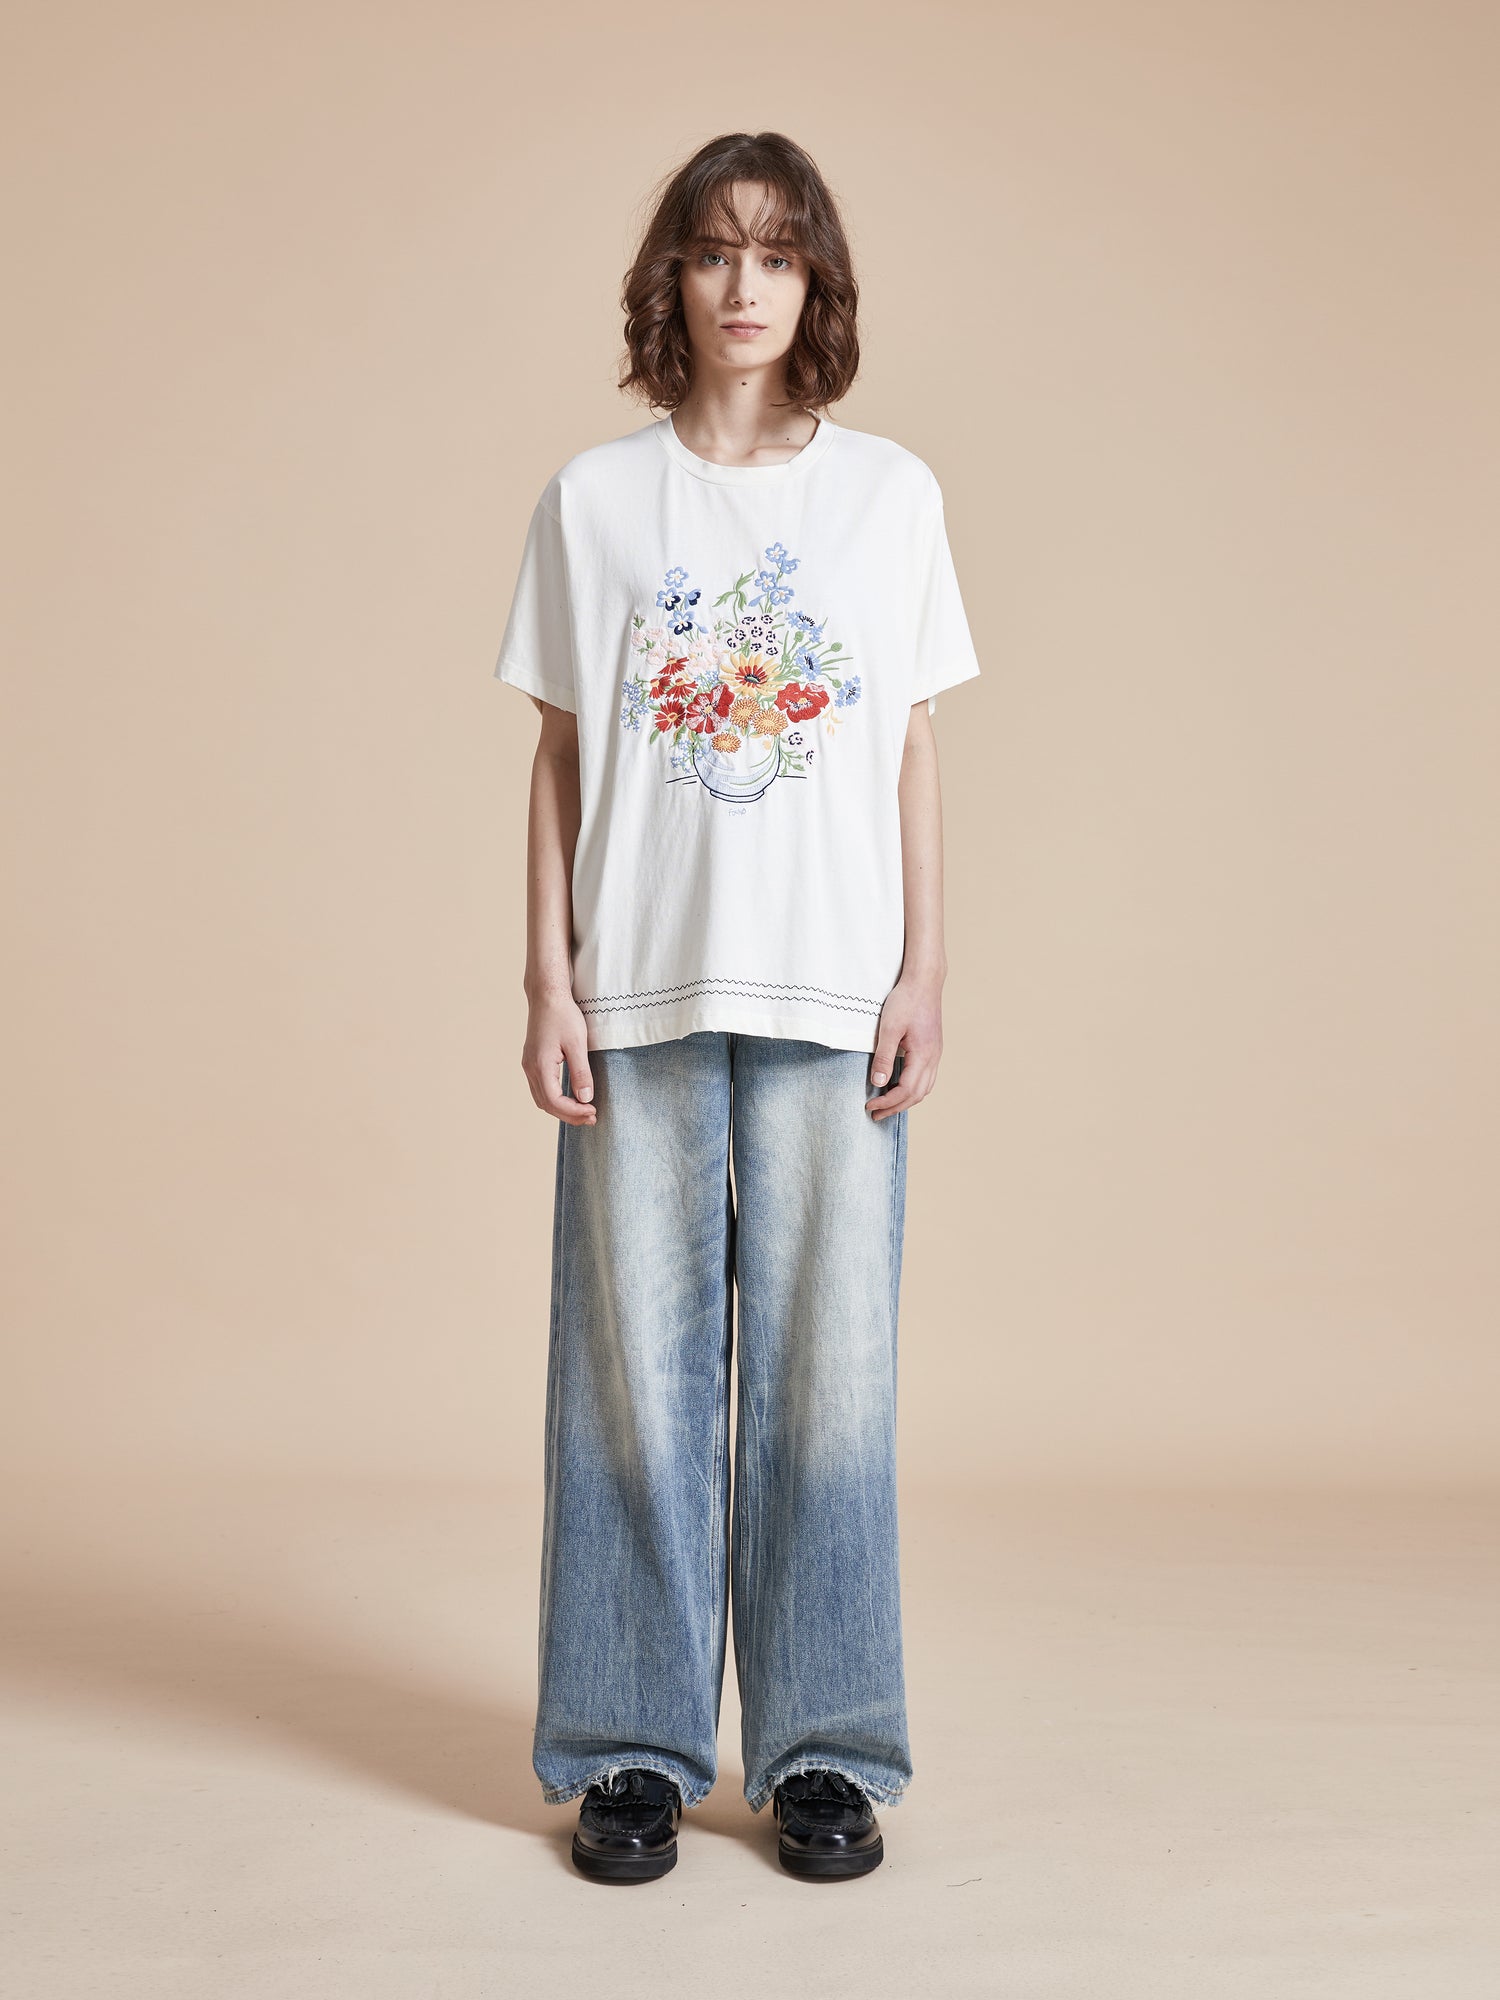 A woman wearing a Bouquet Flowers Tee by Found and blue jeans.